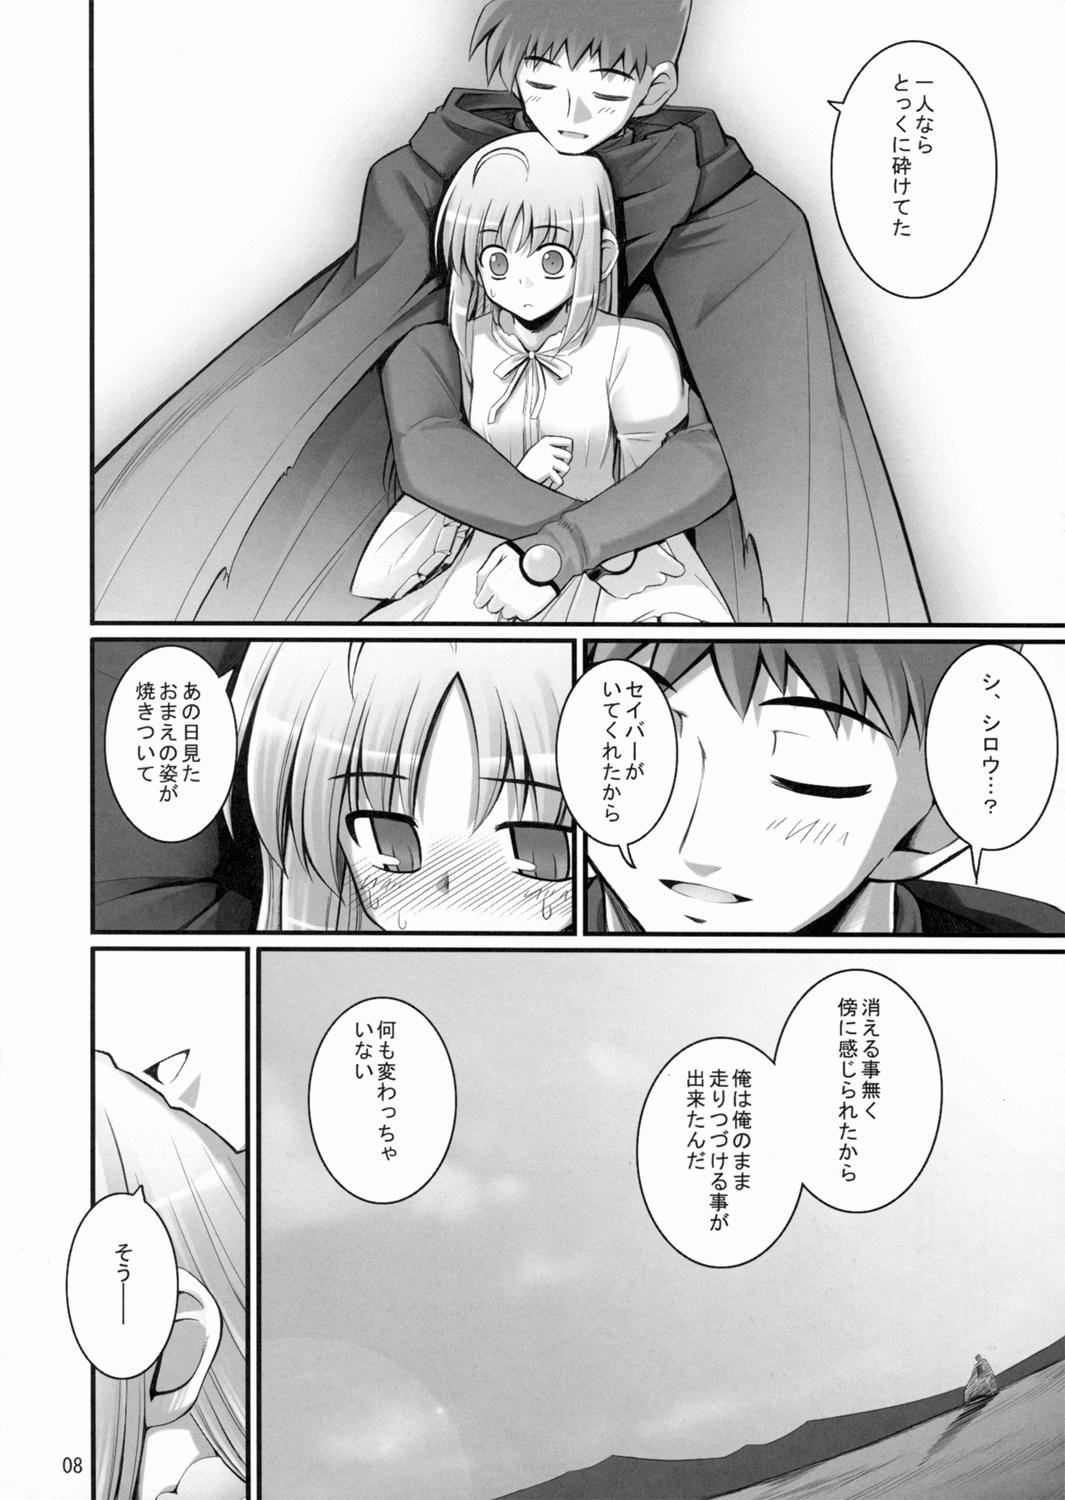 Sextoy RE Soushuuhen 03 - Fate stay night Handjob - Page 7